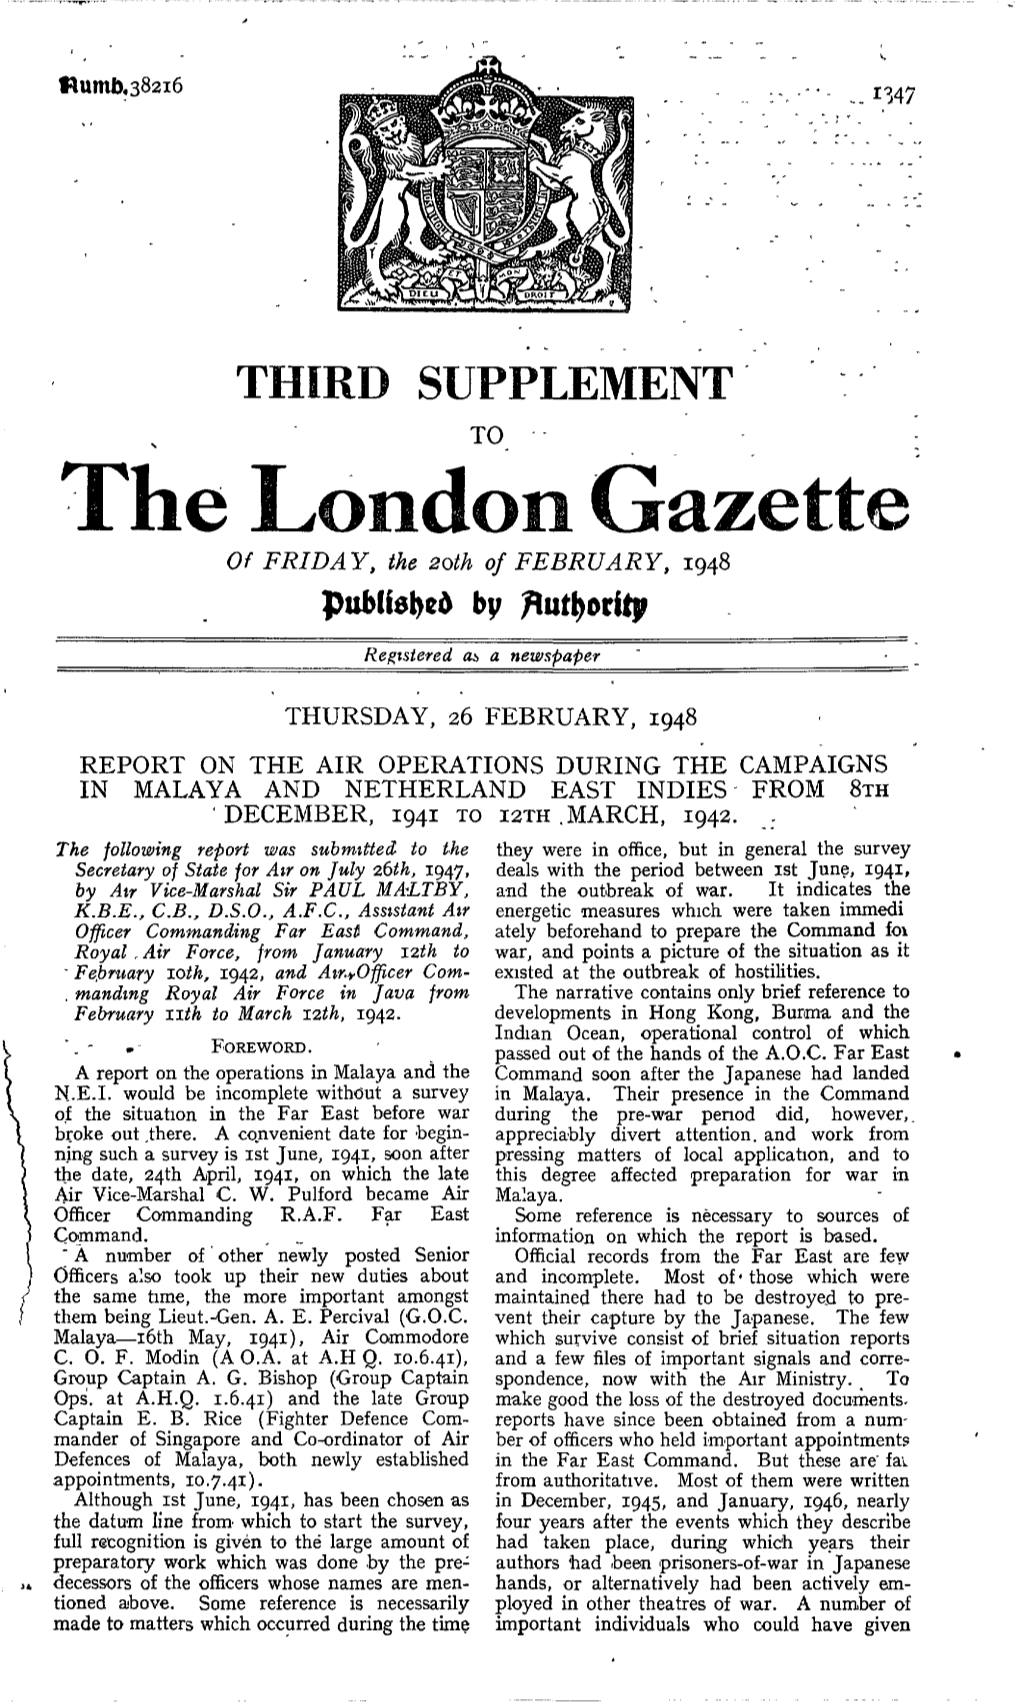 The London Gazette of FRIDAY, the 2Oth of FEBRUARY, 1948 Published By